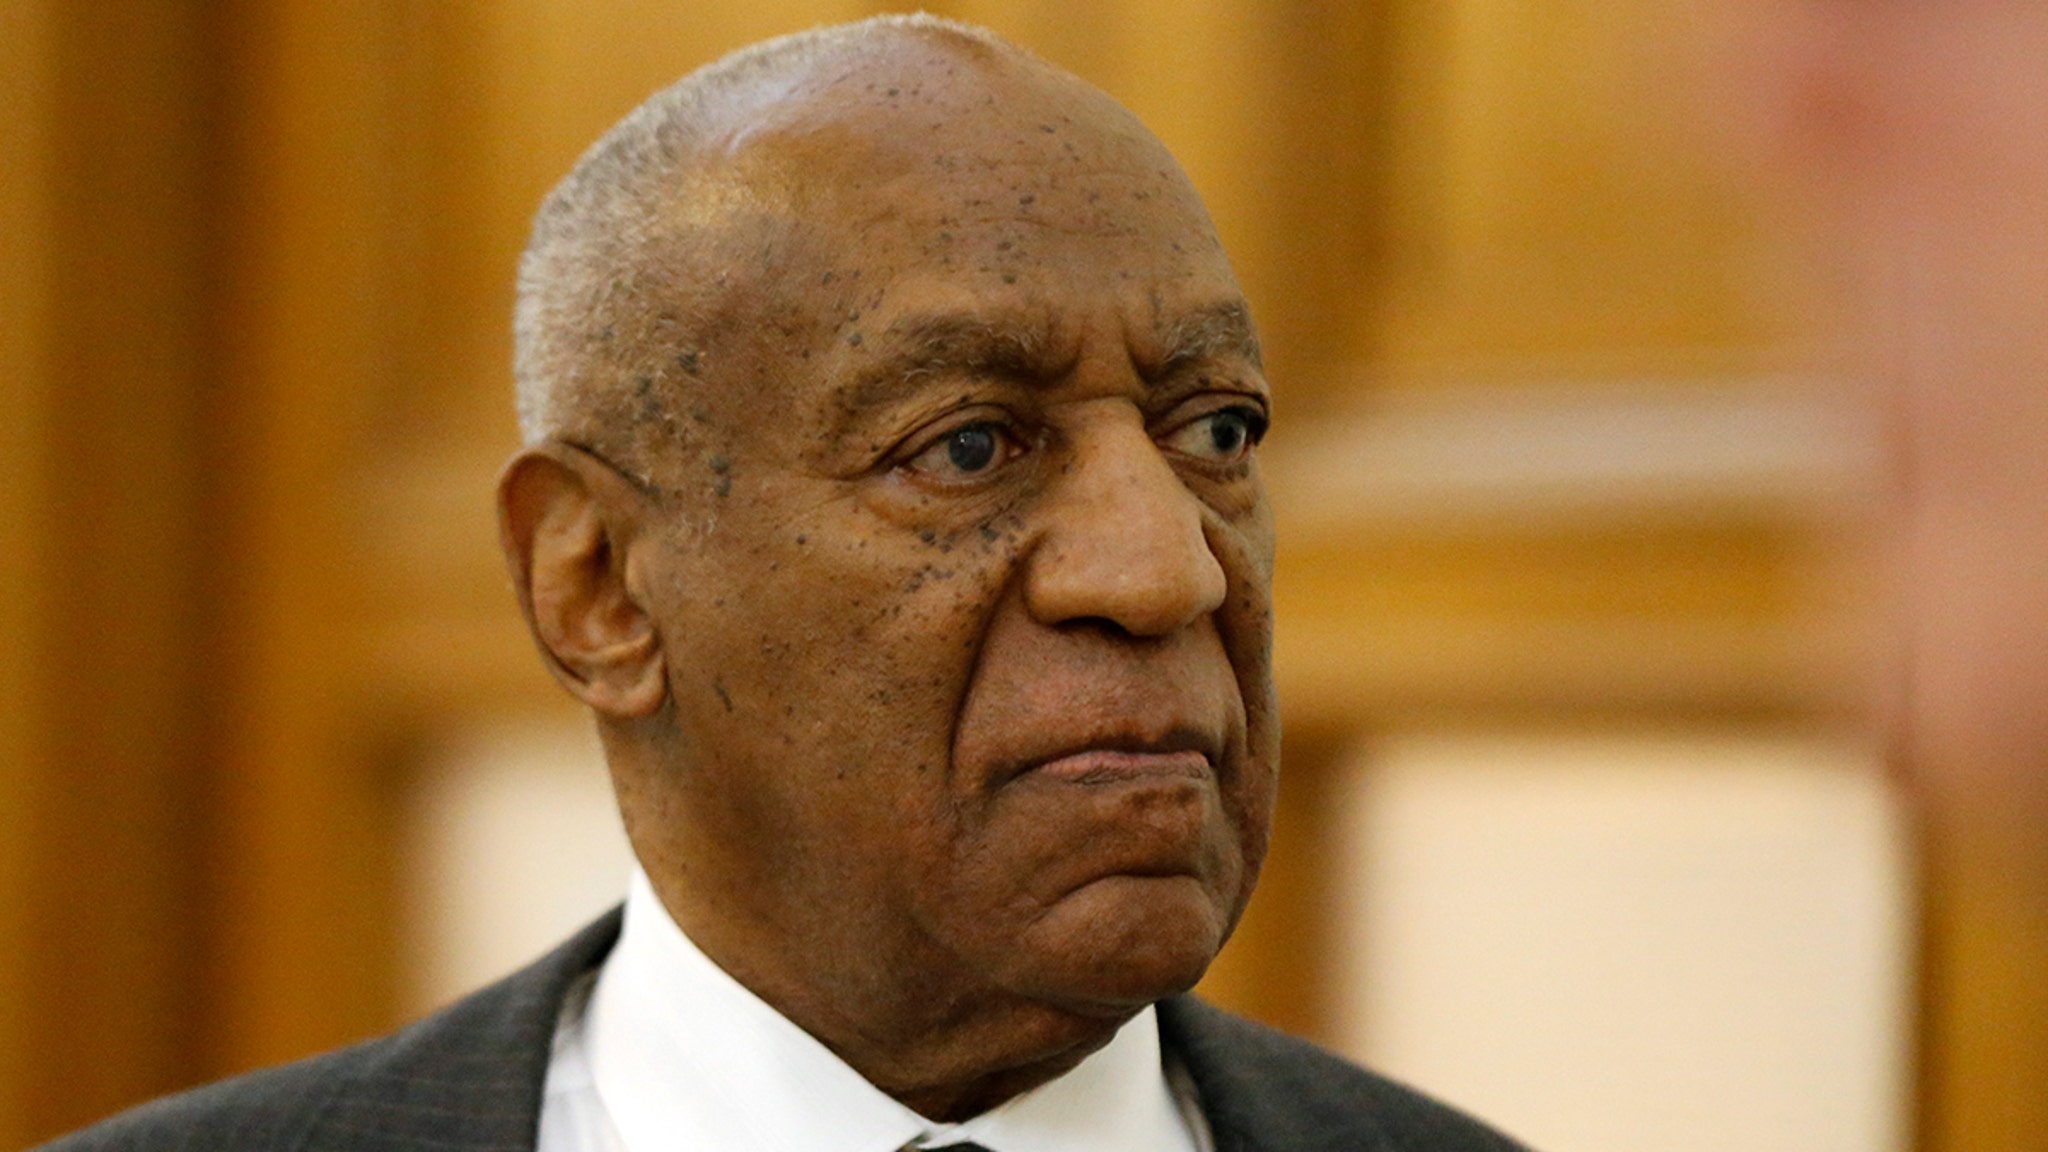 Invoice Cosby Sued For Alleged Sexual Assault in 1969